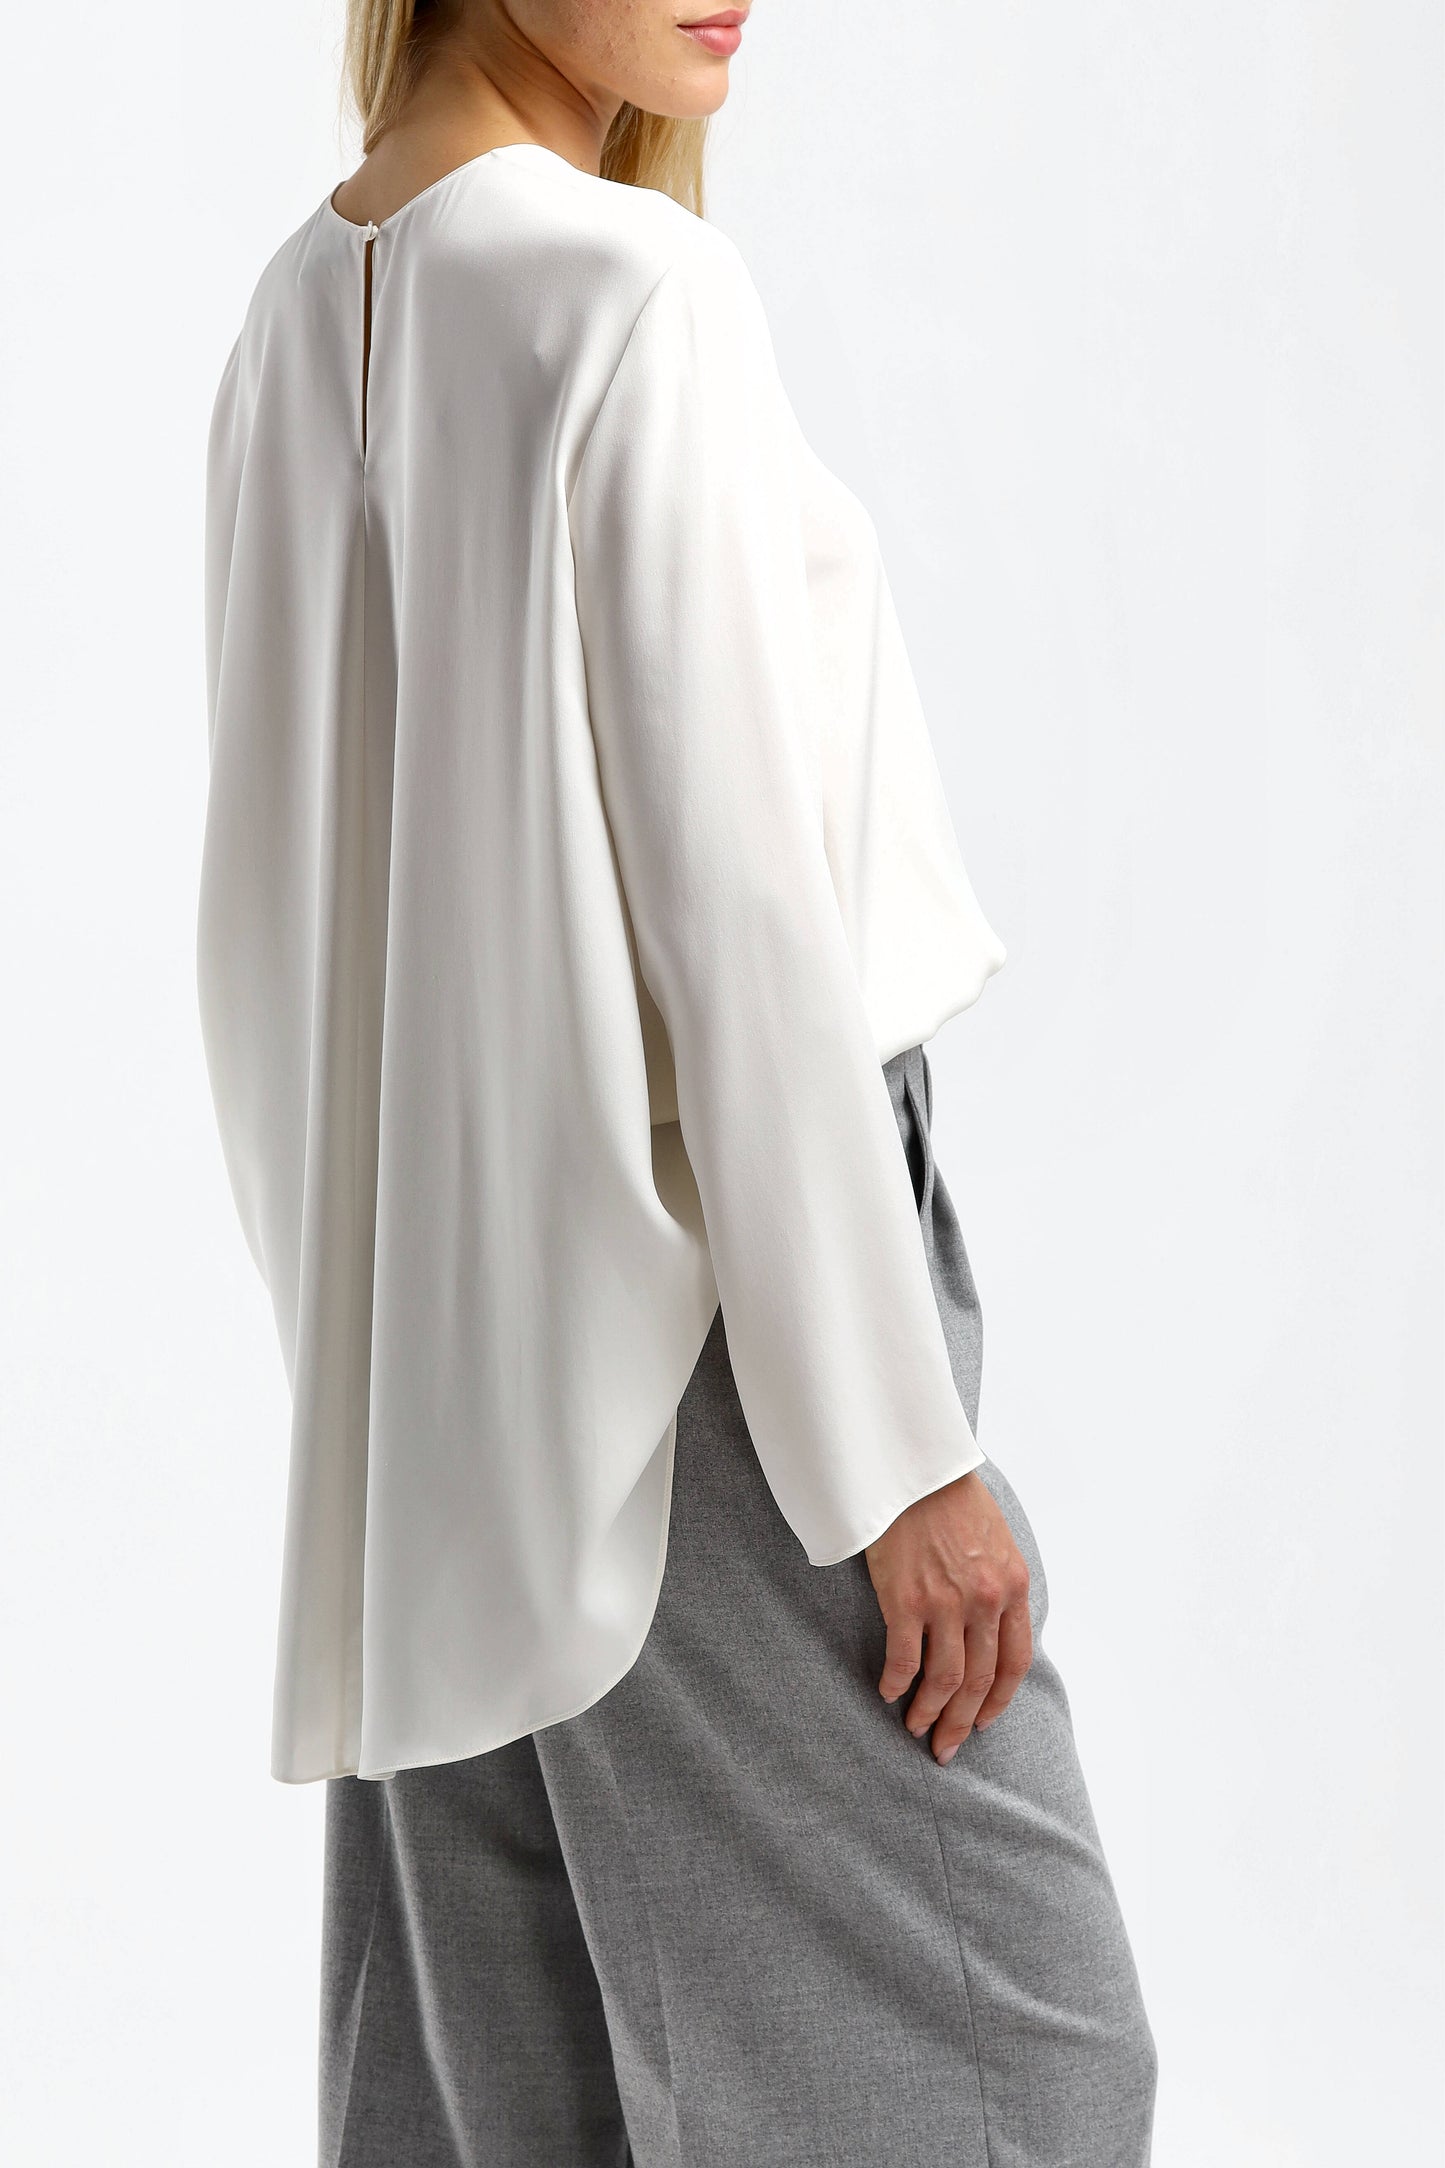 Bluse Cape in IvoryTheory - Anita Hass